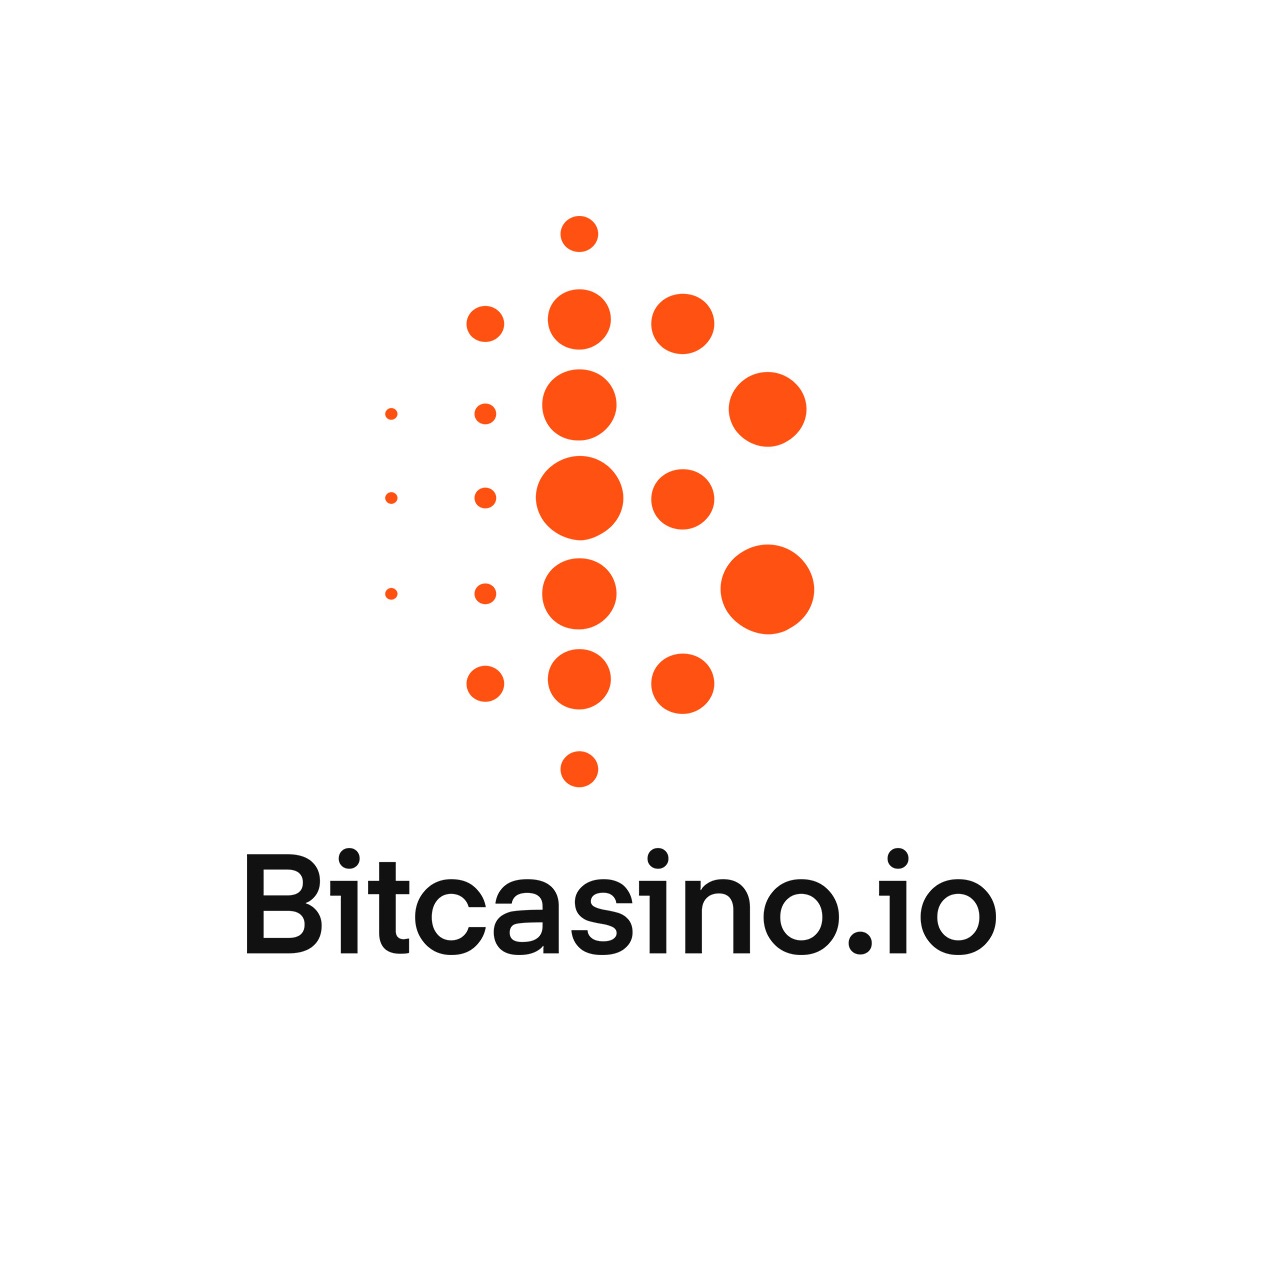 Bitcasino logo with the B letter formed by dots